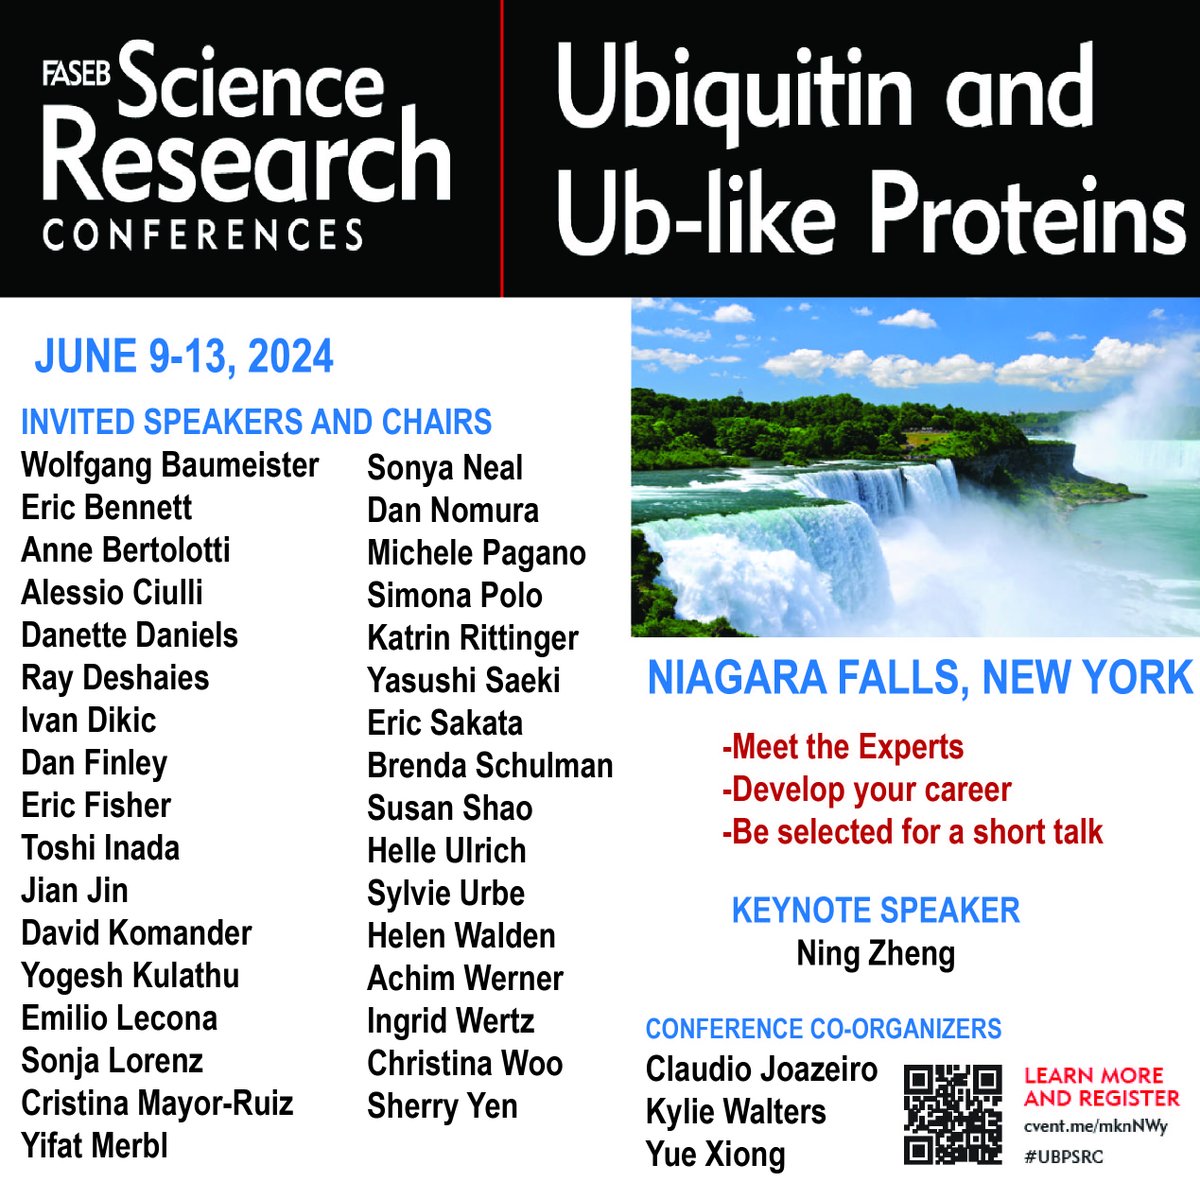 Please join us this summer as the power of Ubiquitin Signaling converges with the power of Niagara Falls for @FASEBorg #UBPSRC. We value DEIA, are raising $ for travel awards, have fantastic speakers and are excited to select new speakers from abstracts. @LabJoazeiro